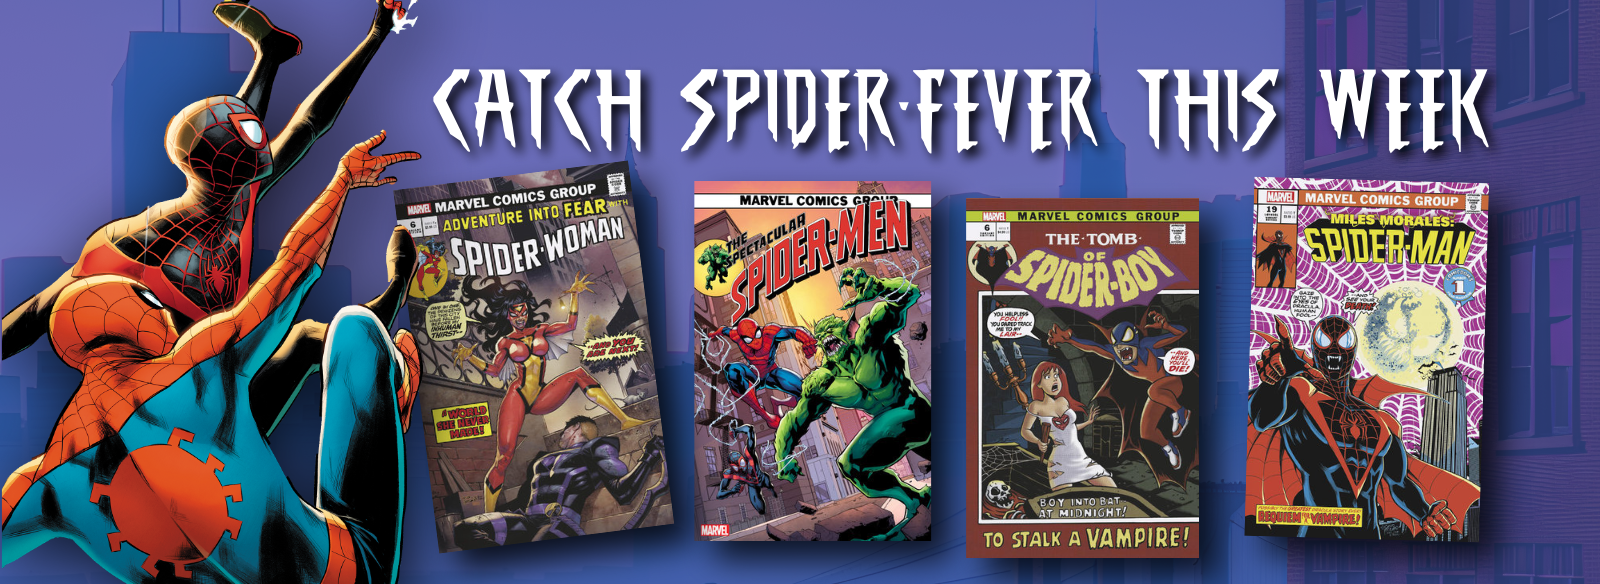 new comic book releases, spider-man